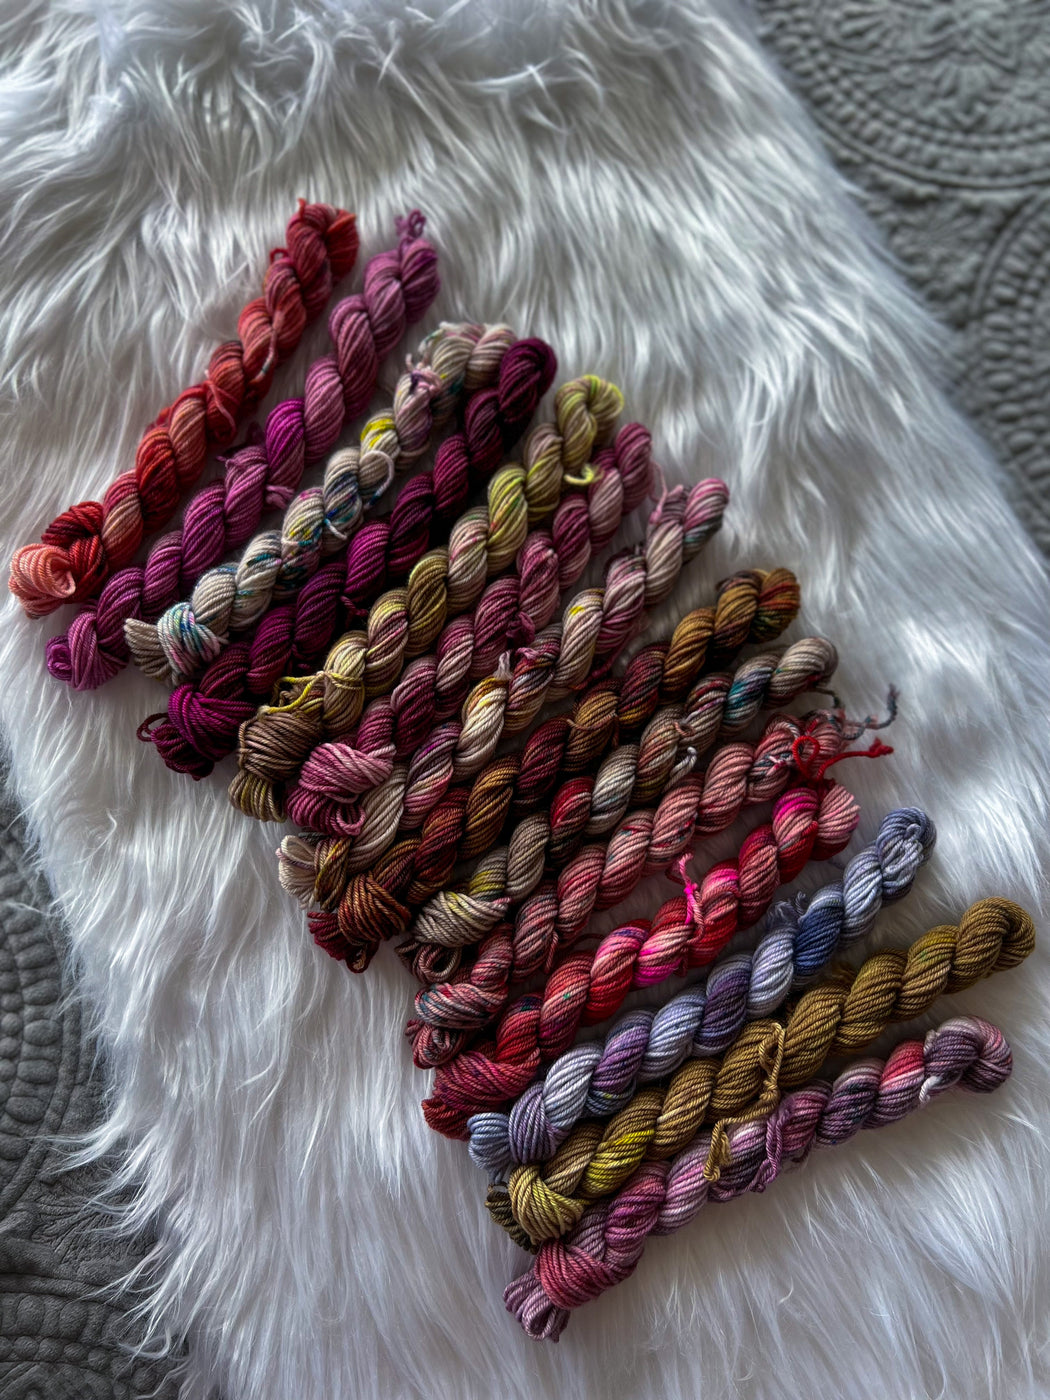 Untraveled Road /// OOAK Minis Collection - Ruby and Roses Yarn - Hand Dyed Yarn